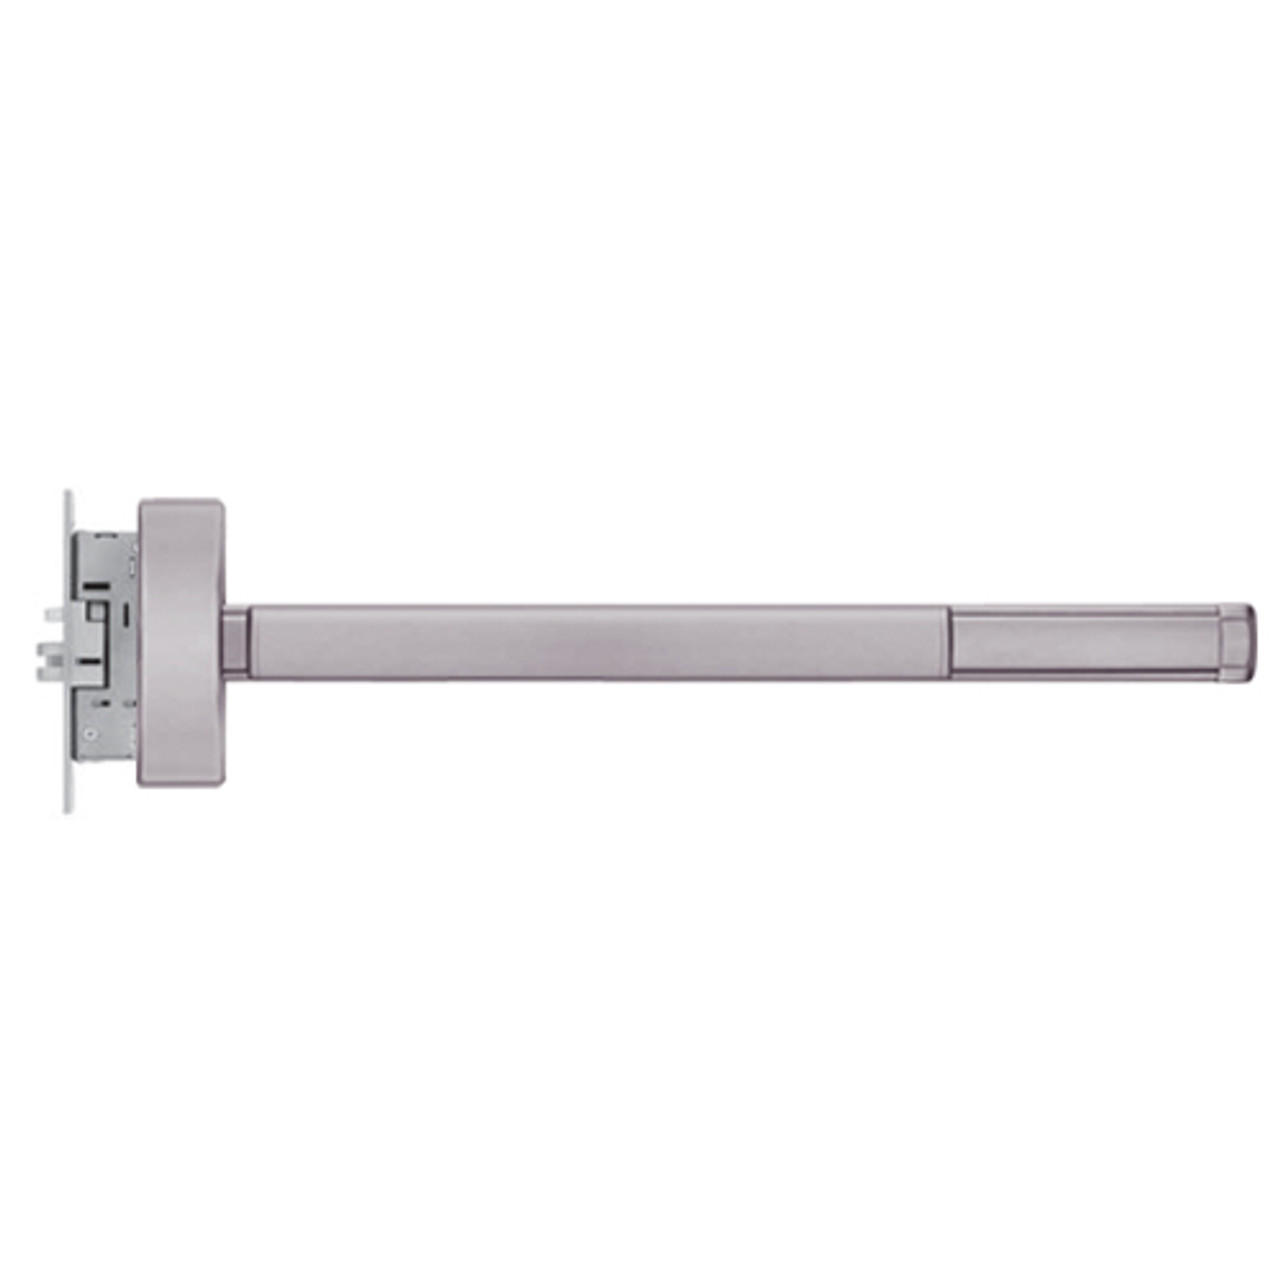 DE2308-LHR-630-48 PHI 2300 Series Apex Mortise Exit Device with Delayed Egress Prepped for Key Controls Lever/Knob in Satin Stainless Steel Finish